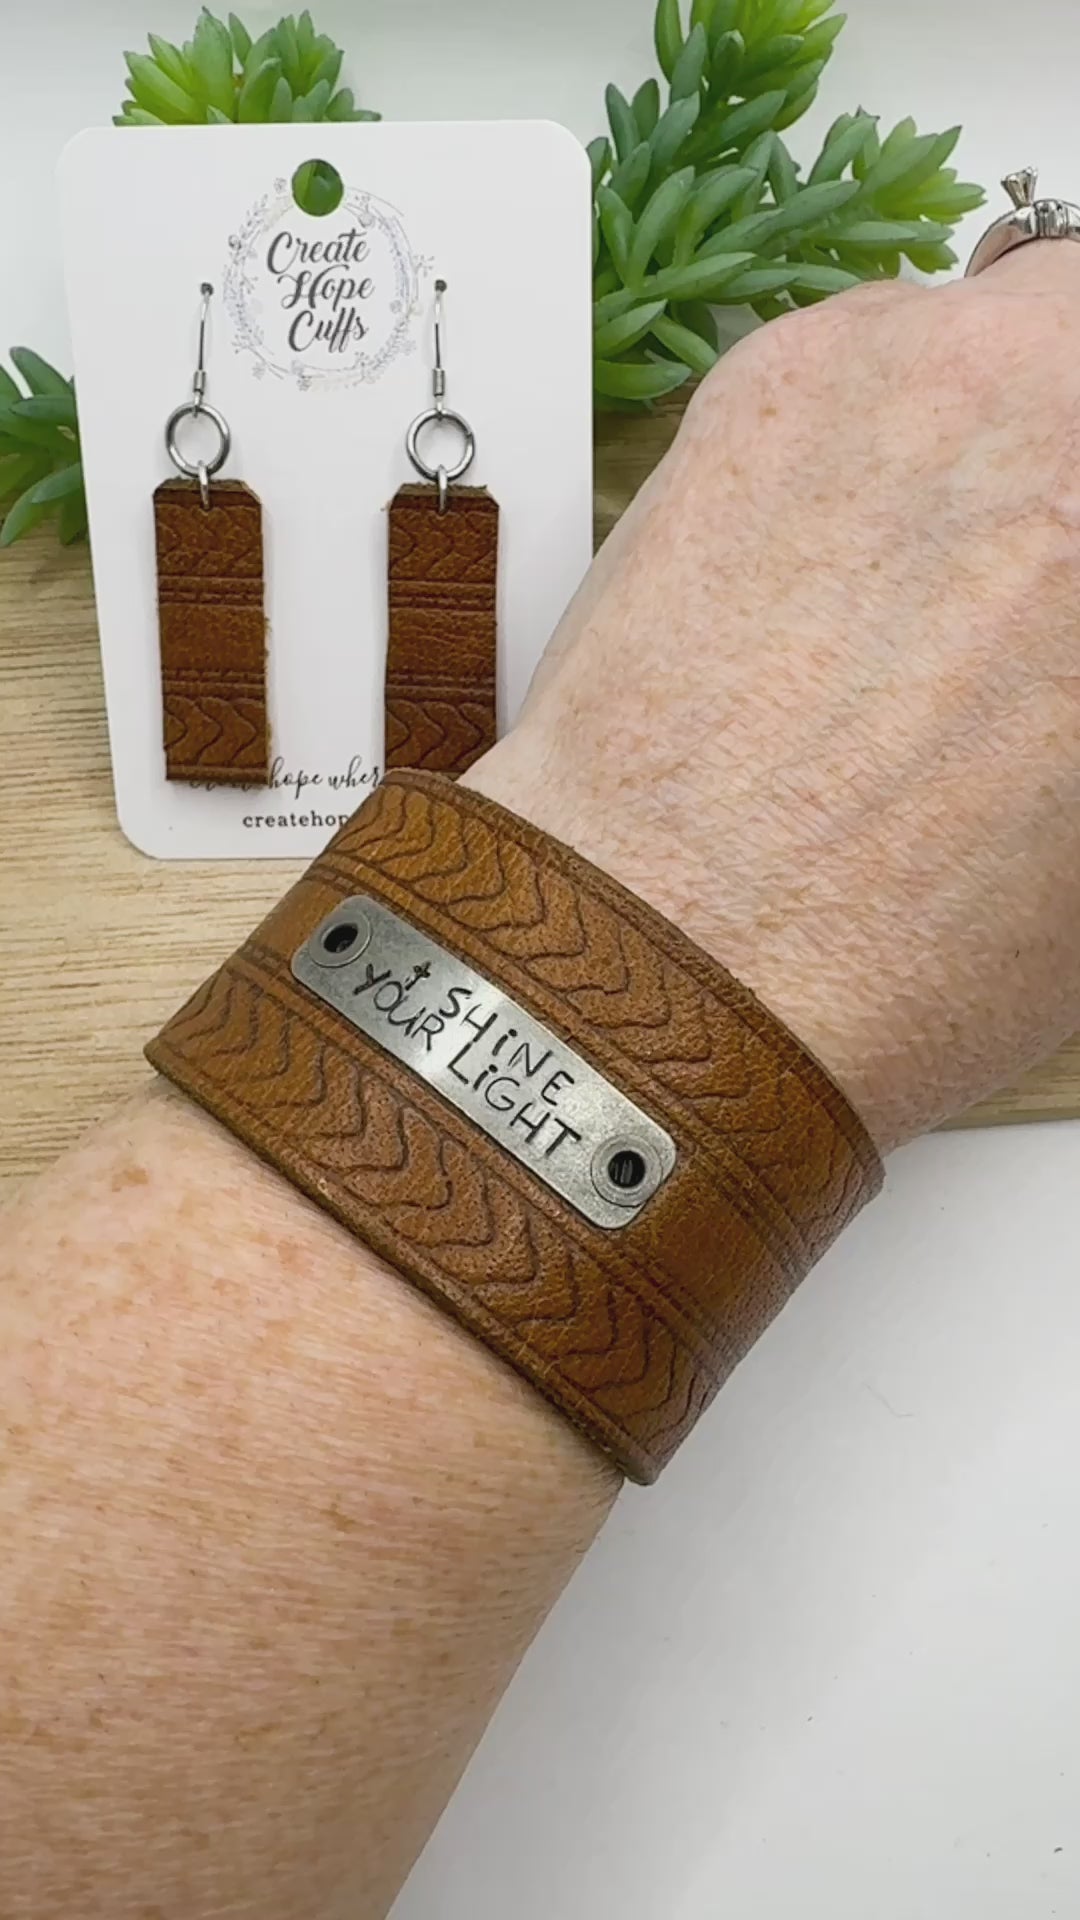 Chevron SHINE YOUR LIGHT | Brown Wide Leather OOAK | One of A Kind | Upcycled Cuff | Adjustable | Women